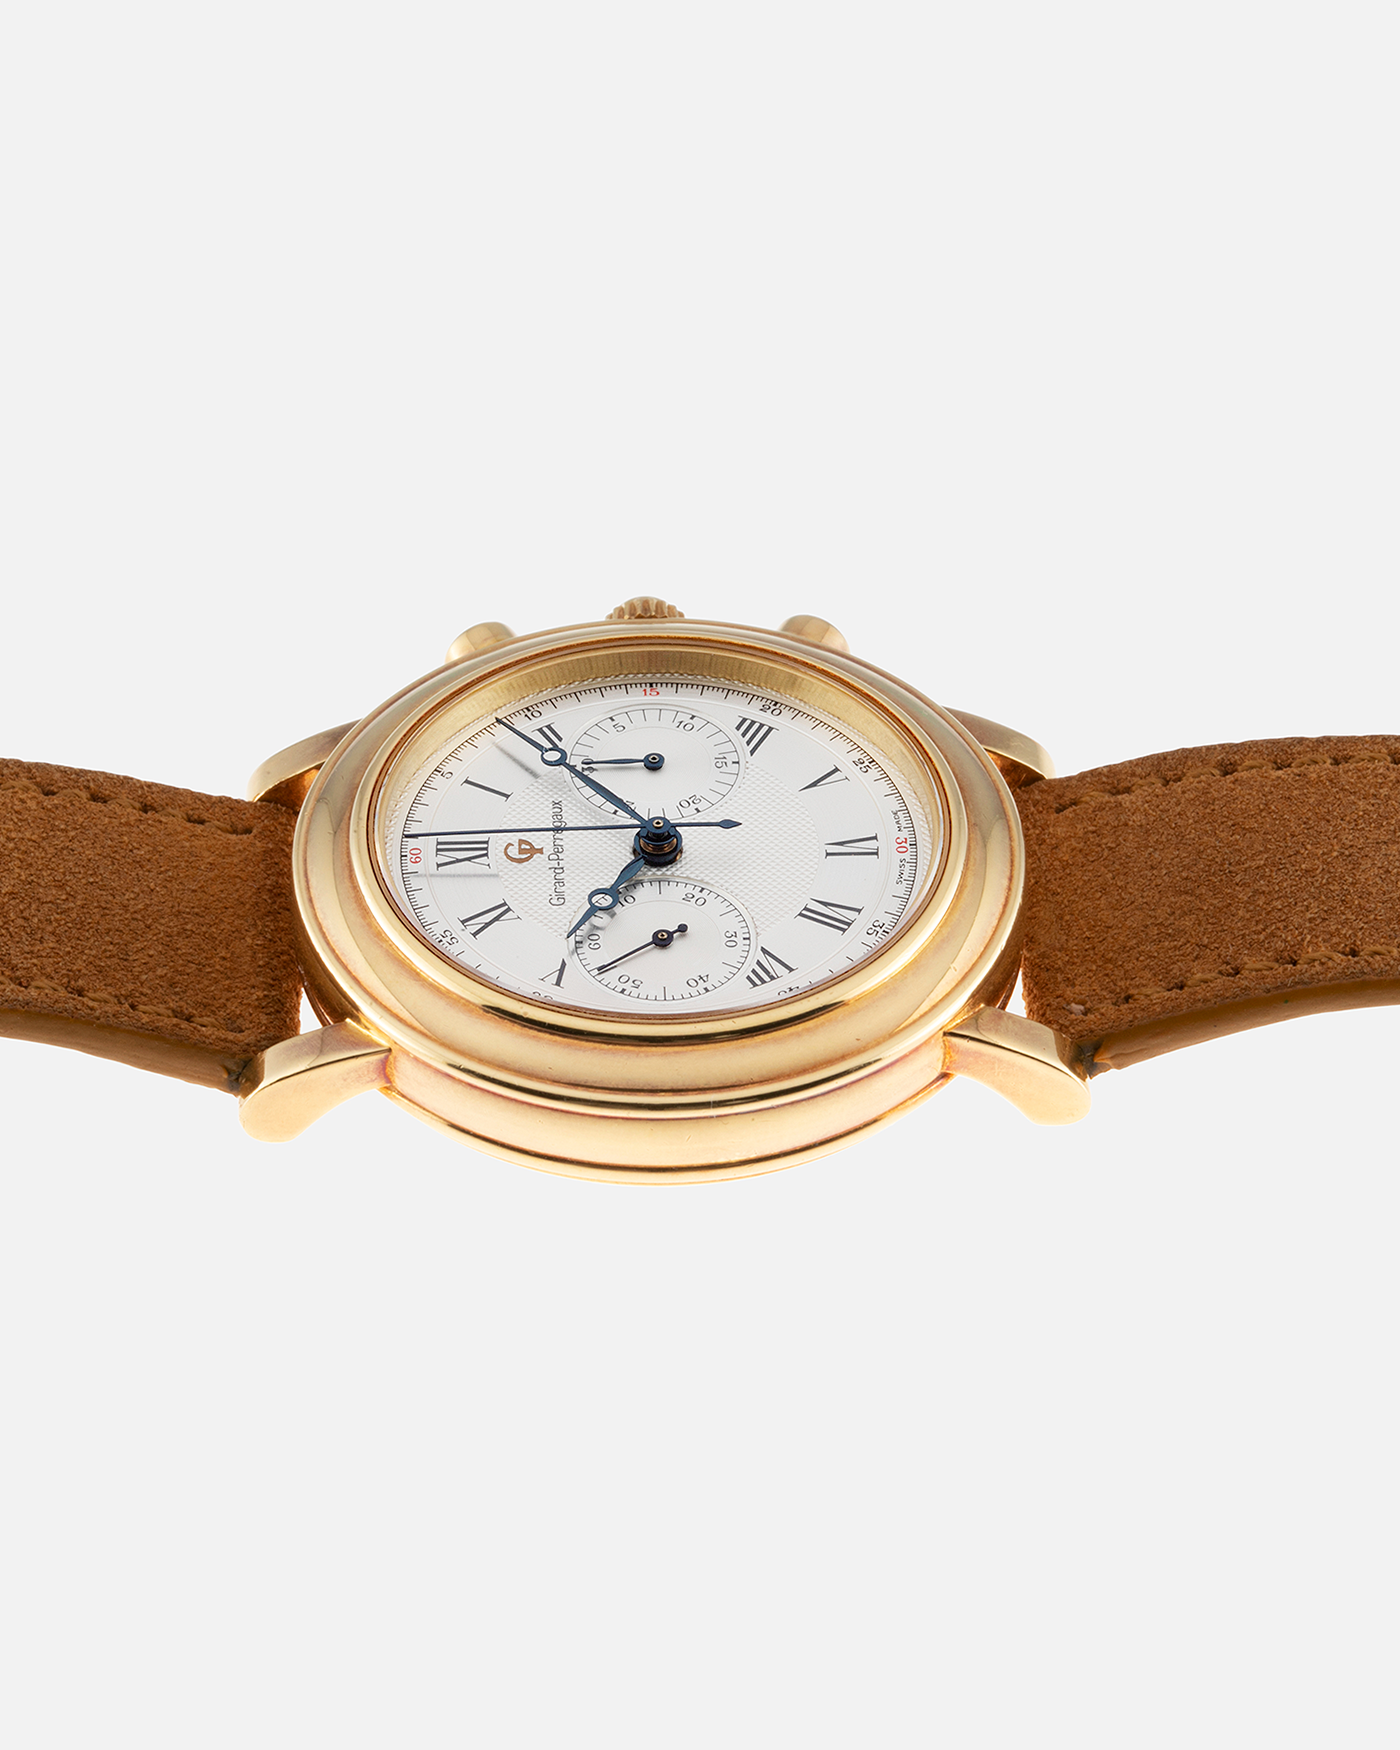 Brand: Girard Perregaux Year: 1990’s Reference Number: 47930 Material: 18k Yellow Gold Movement: Lemania Cal. 1872  Case Diameter: 38mm Strap: Tan Strap and 18k Yellow Gold Girard Perregaux Tan Buckle